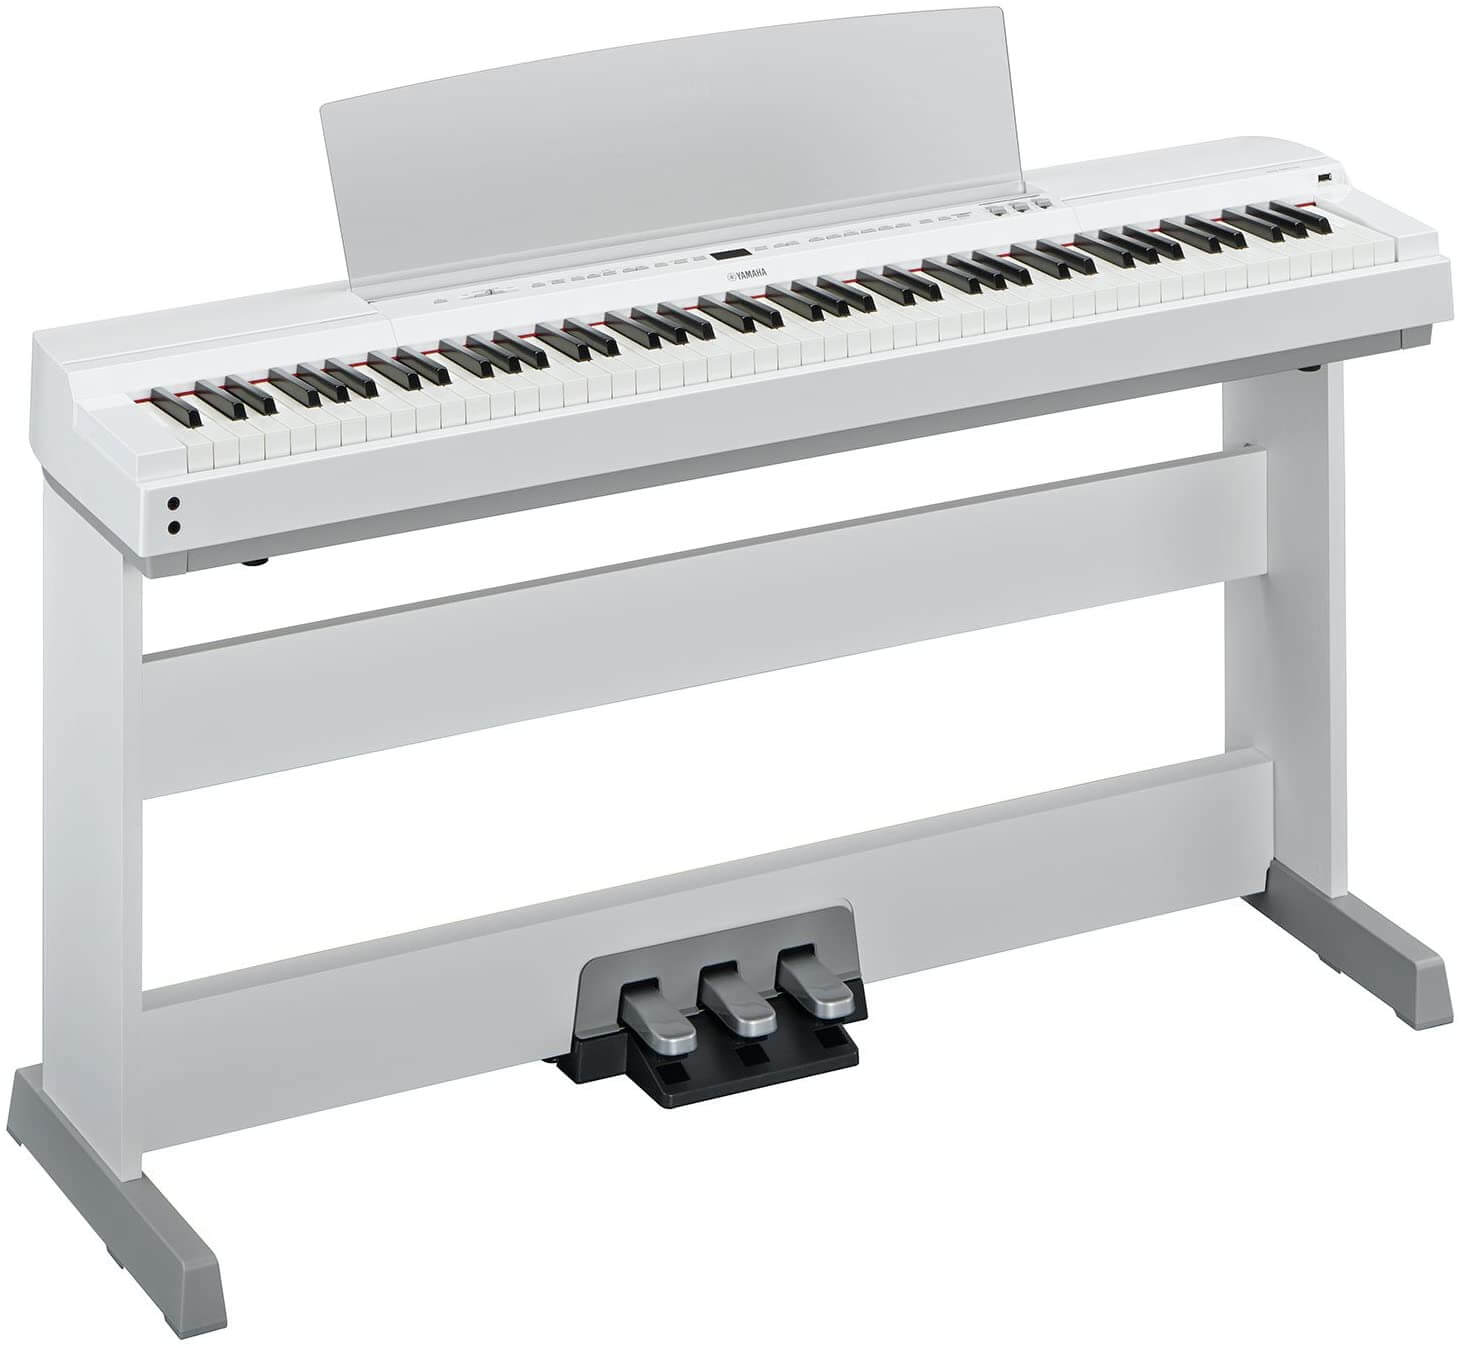 Yamaha P-255 Review - How Good Is This Piano?